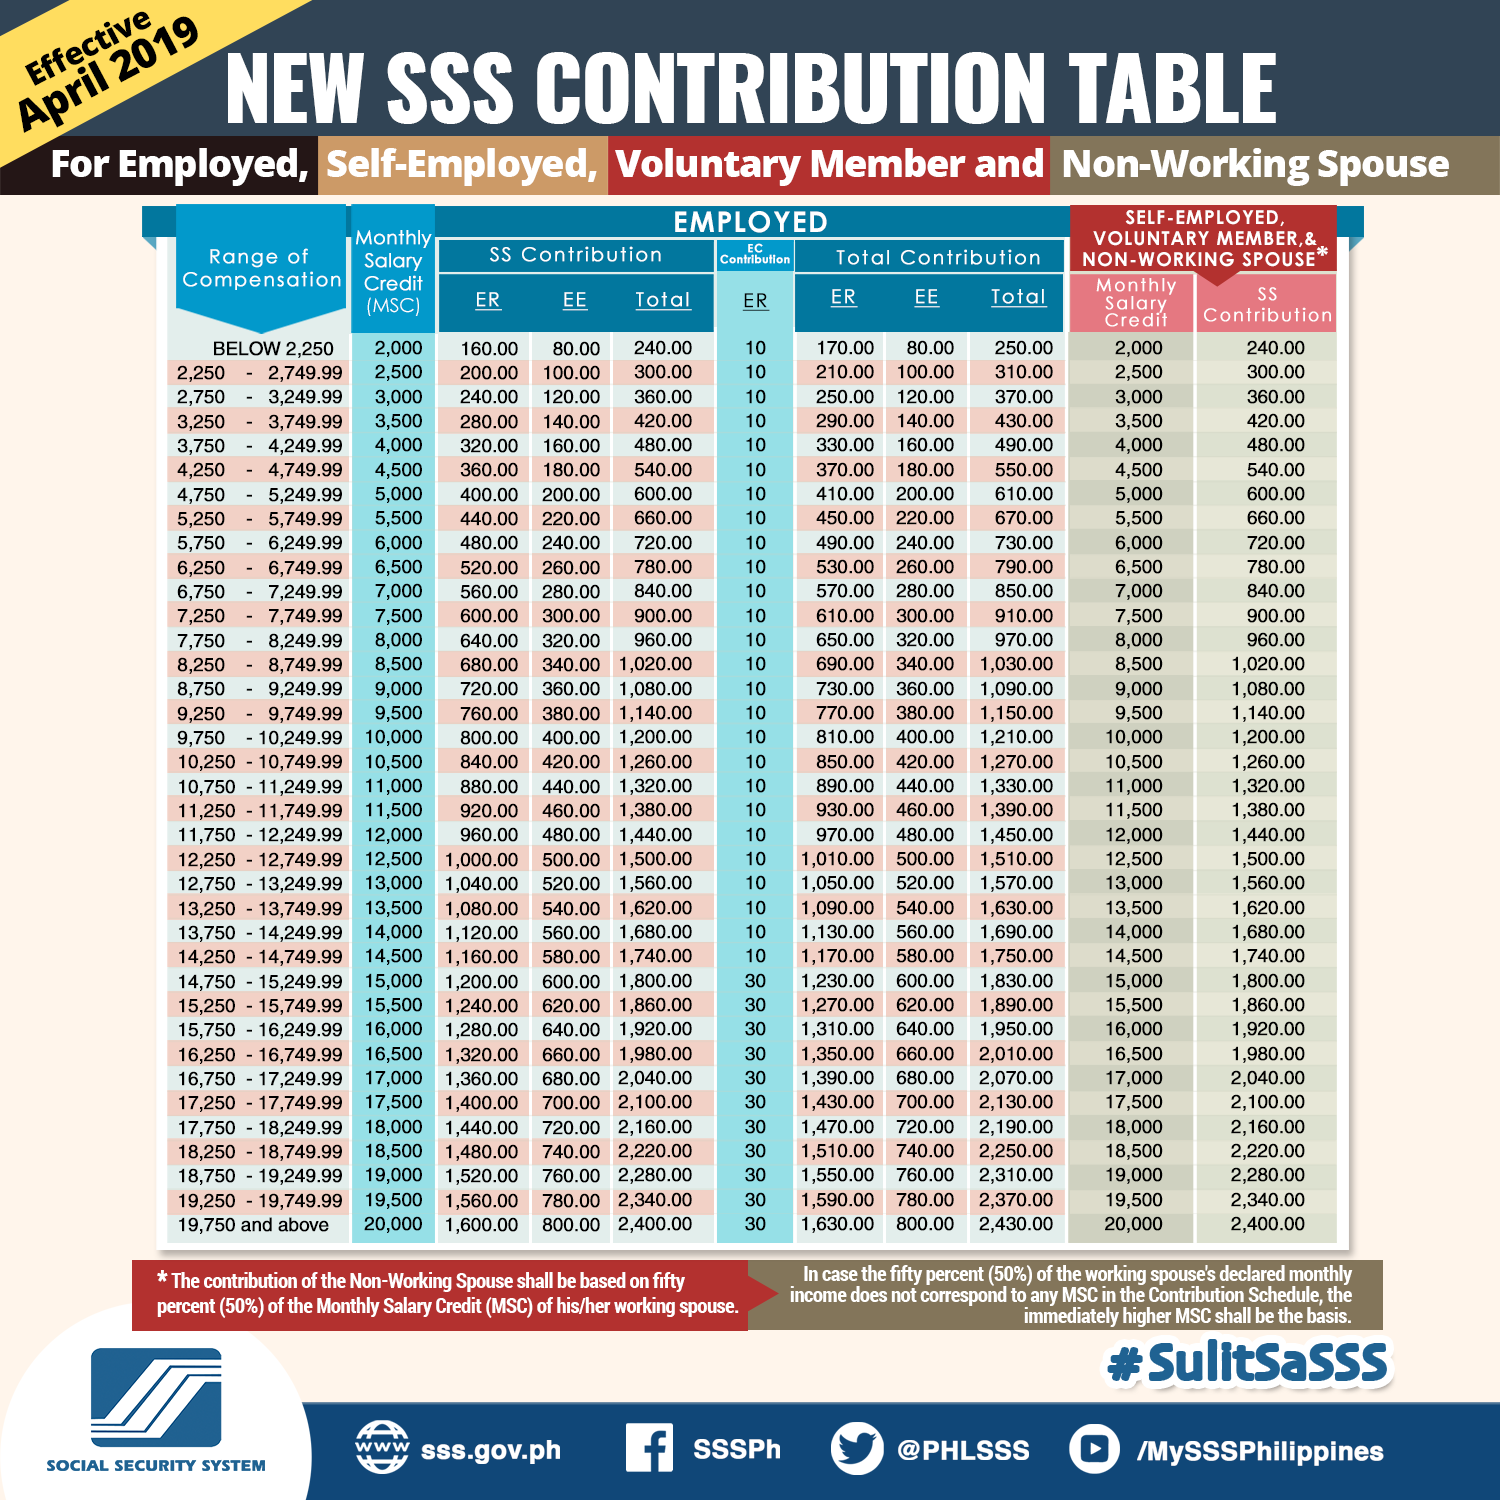 sss-newly-updated-contribution-table-for-2019